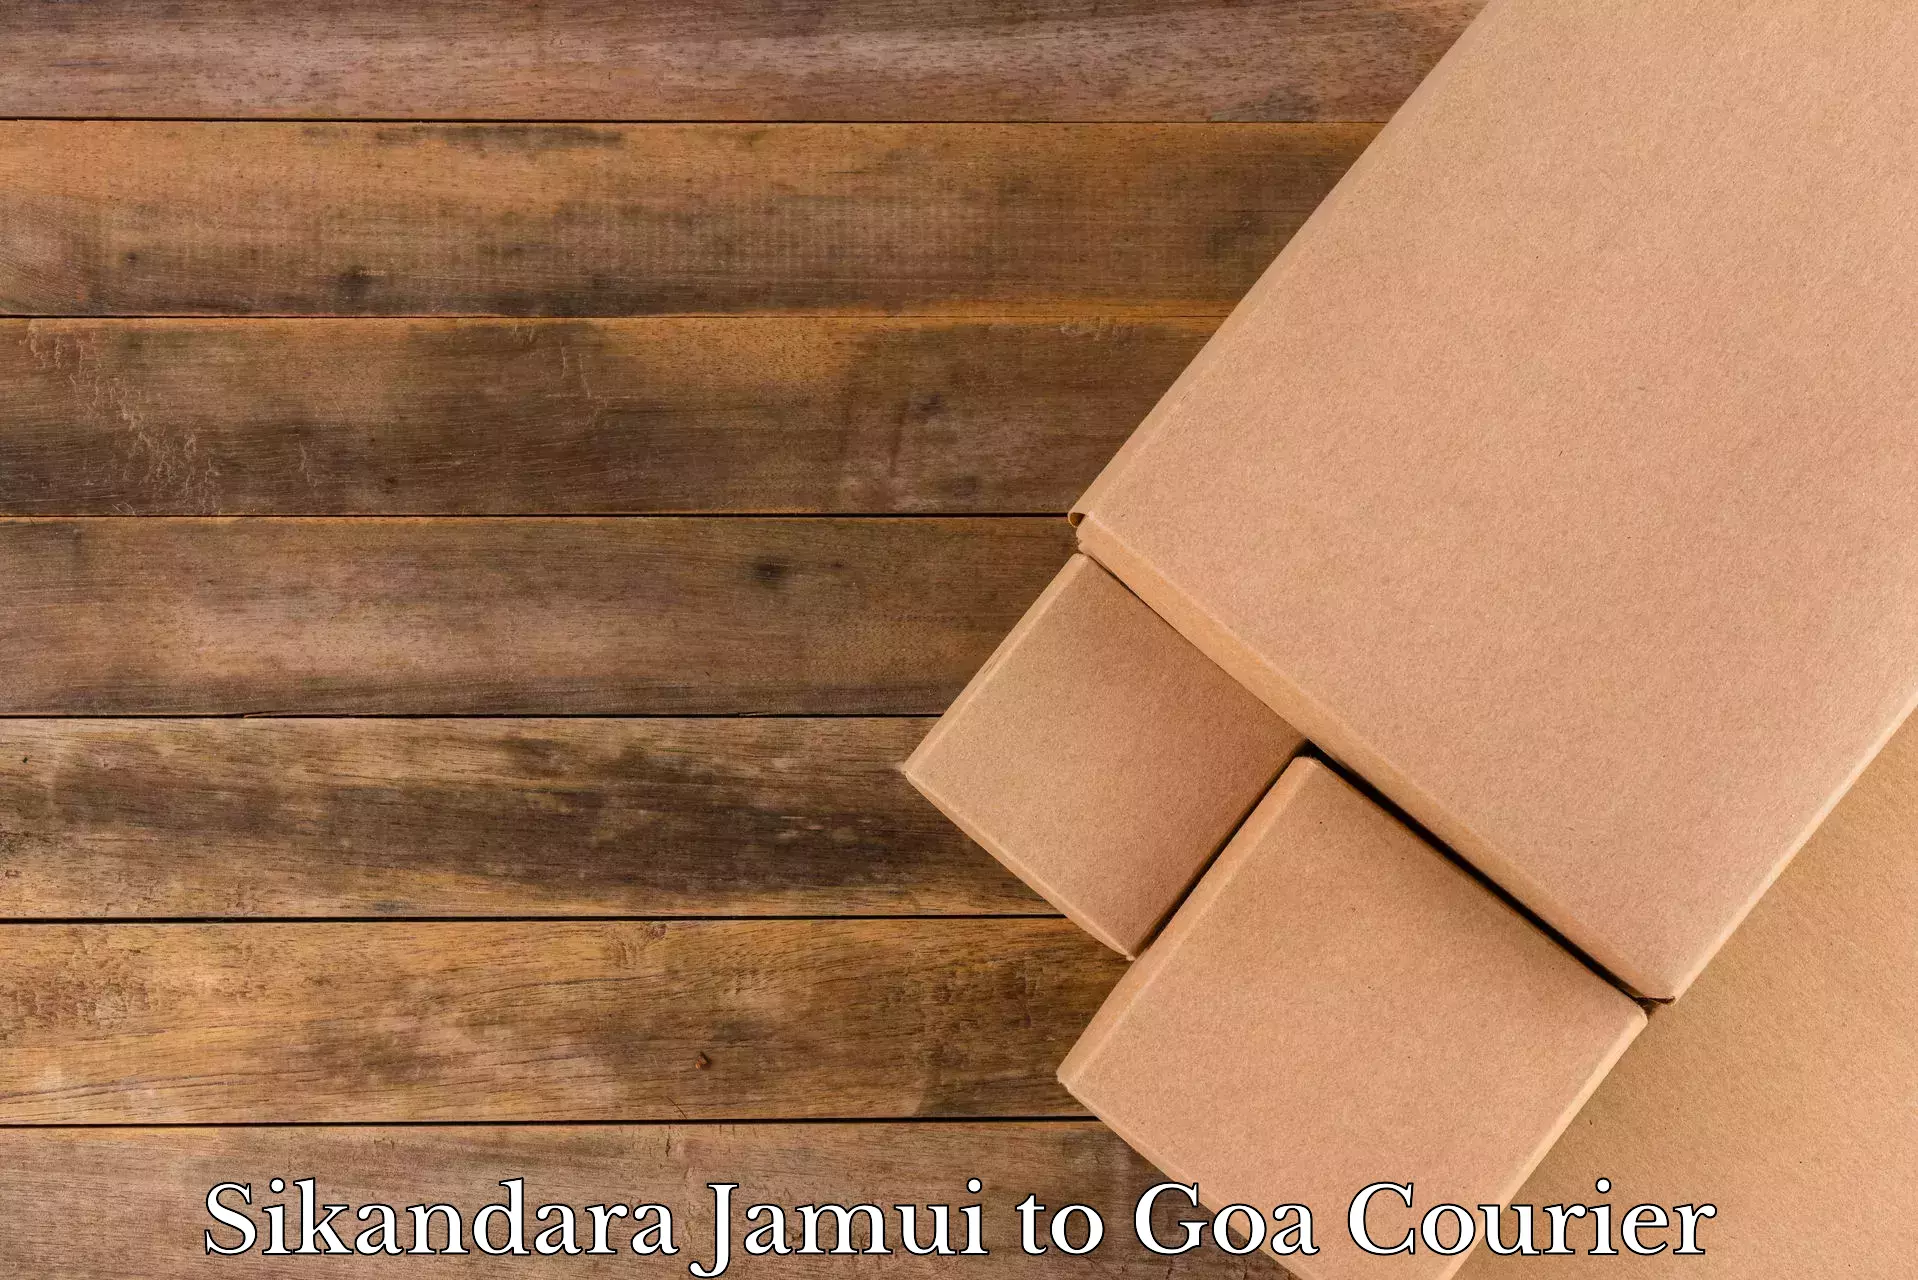 Expert goods movers in Sikandara Jamui to Margao